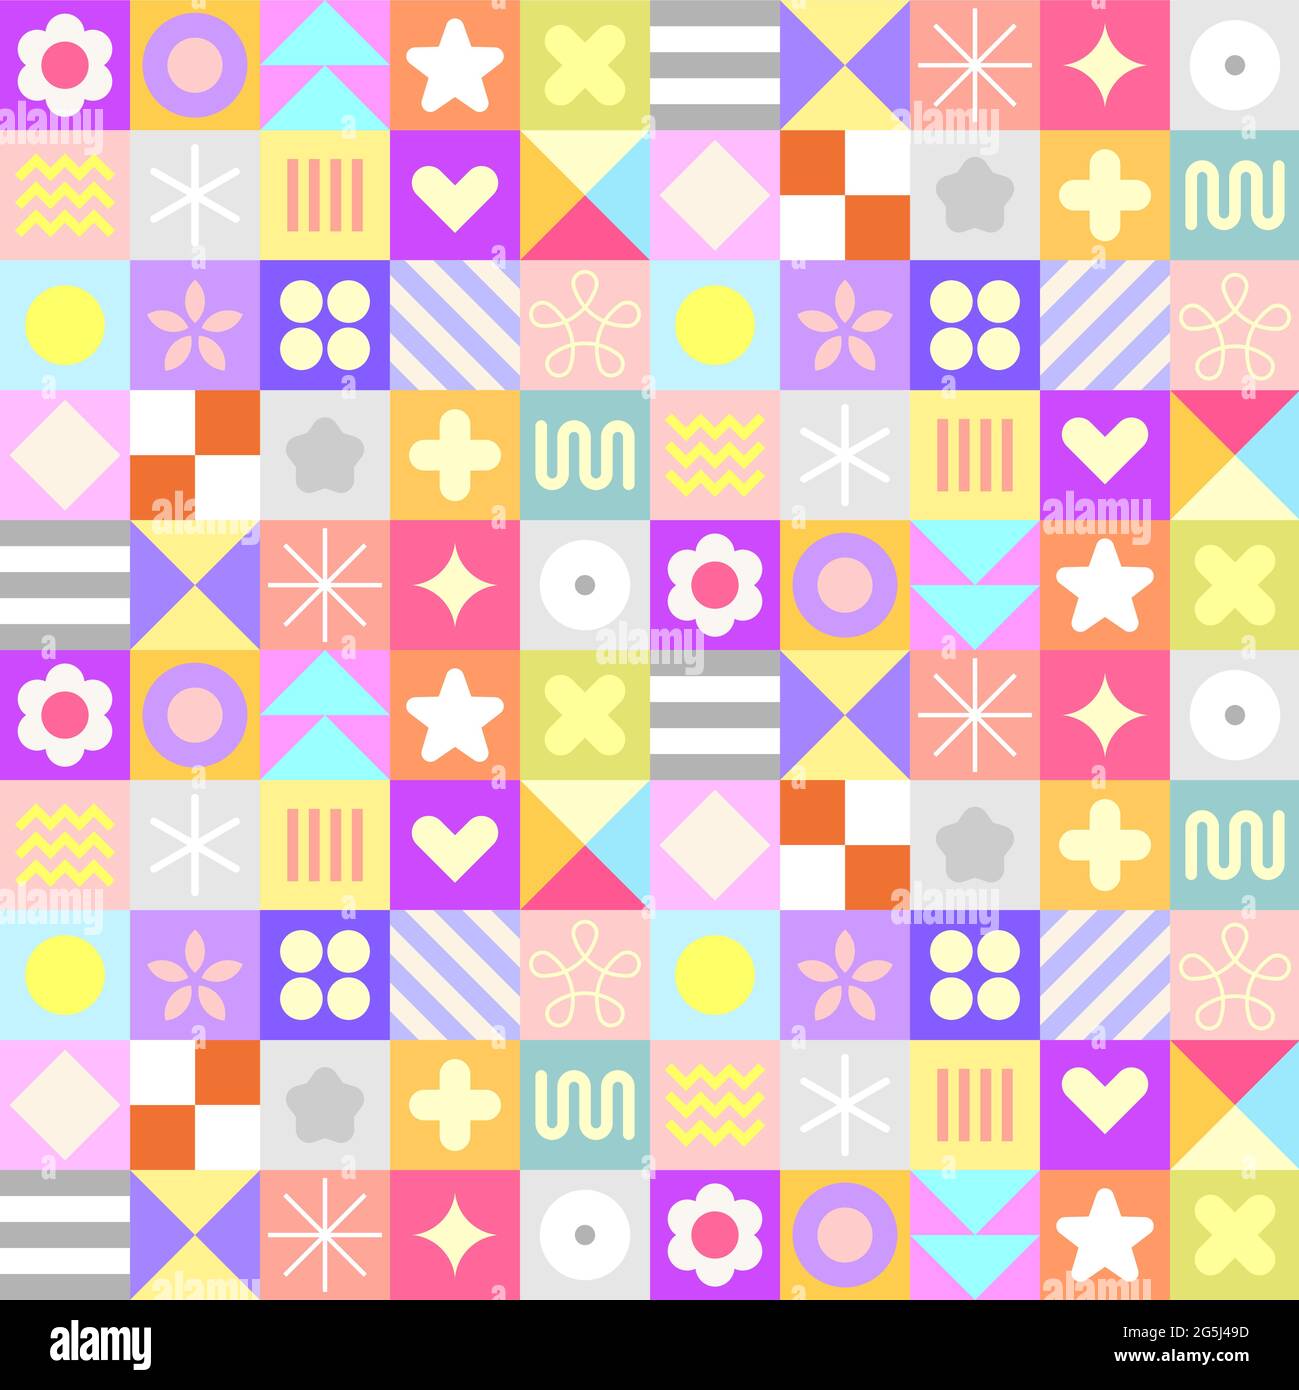 Pastel colors abstract geometric shapes vector seamless background. Stock Vector